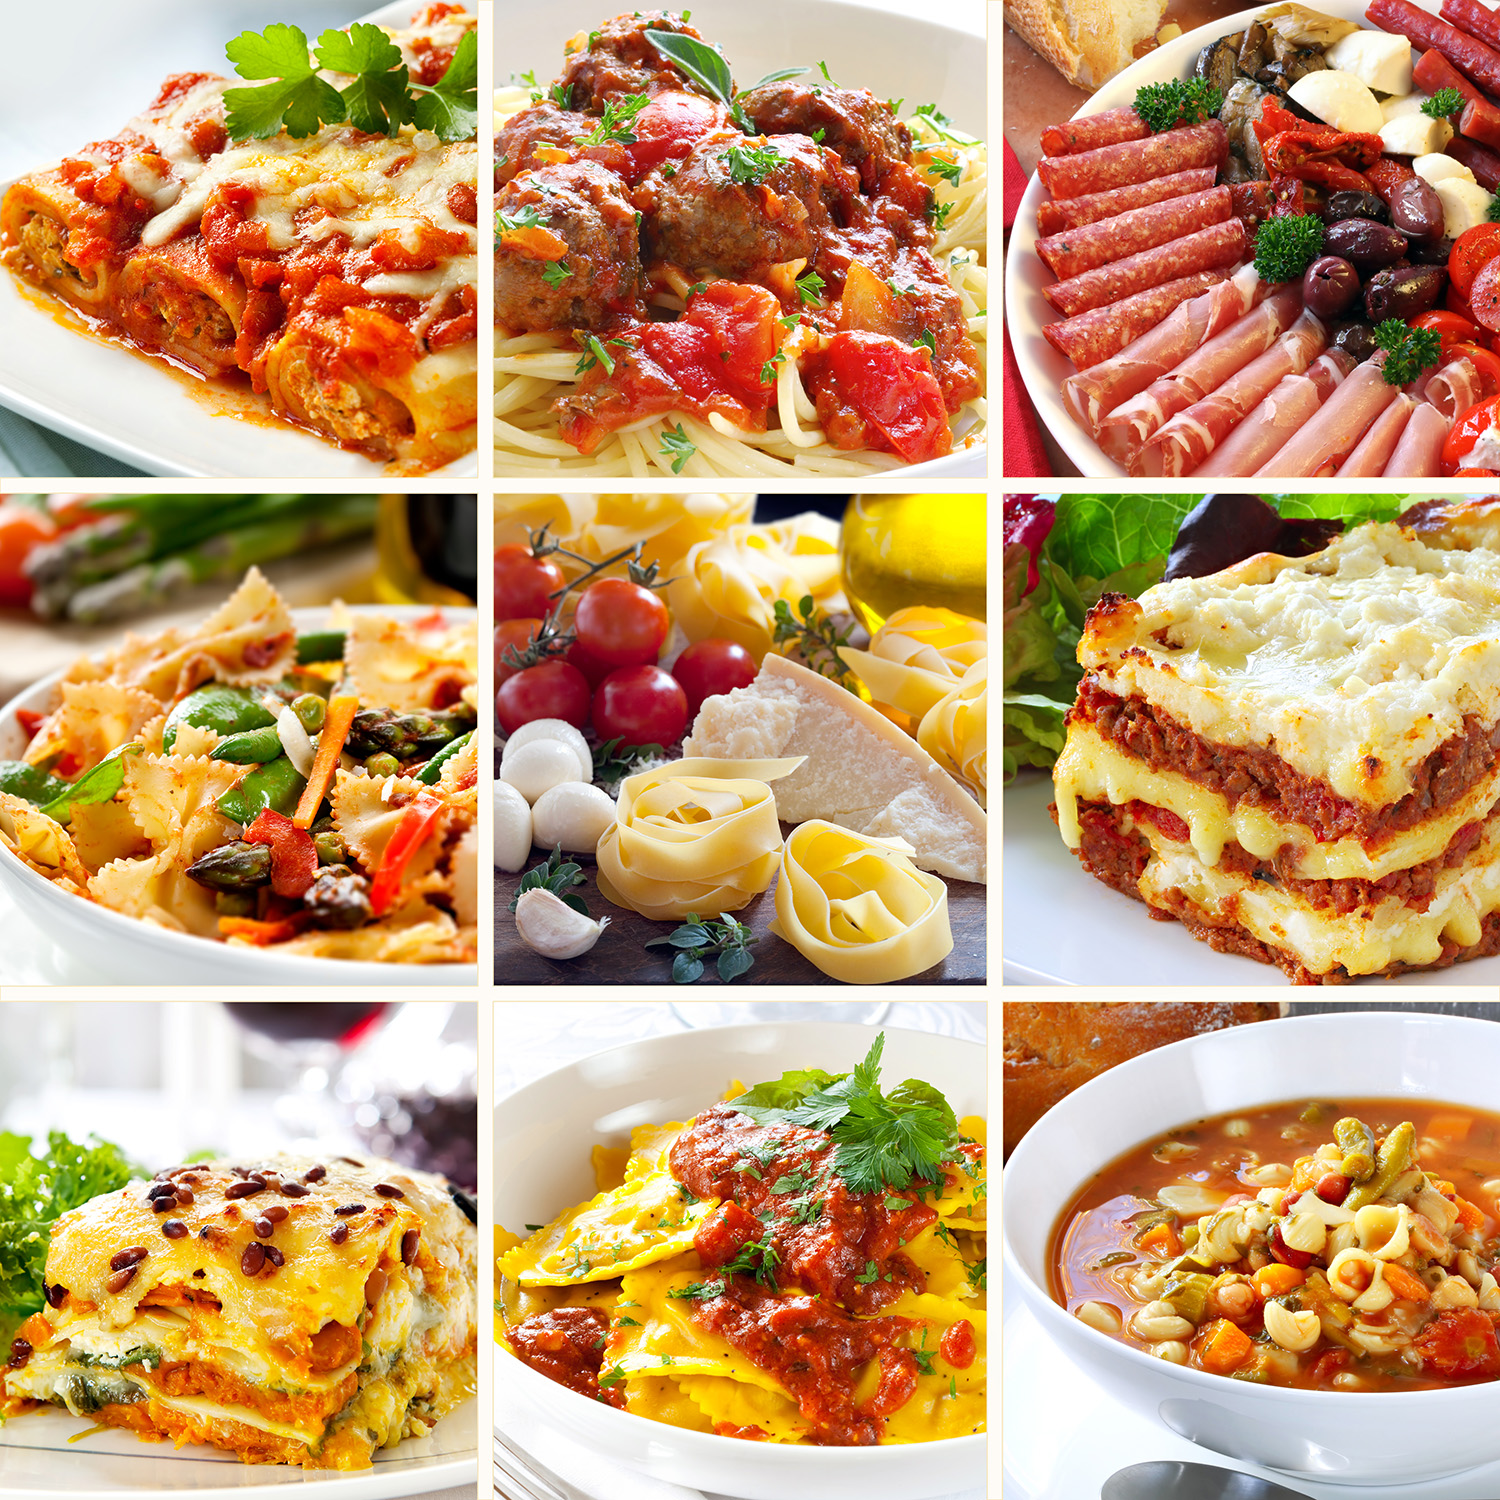 Top 90+ Images Pictures Of Italian Food Dishes Completed